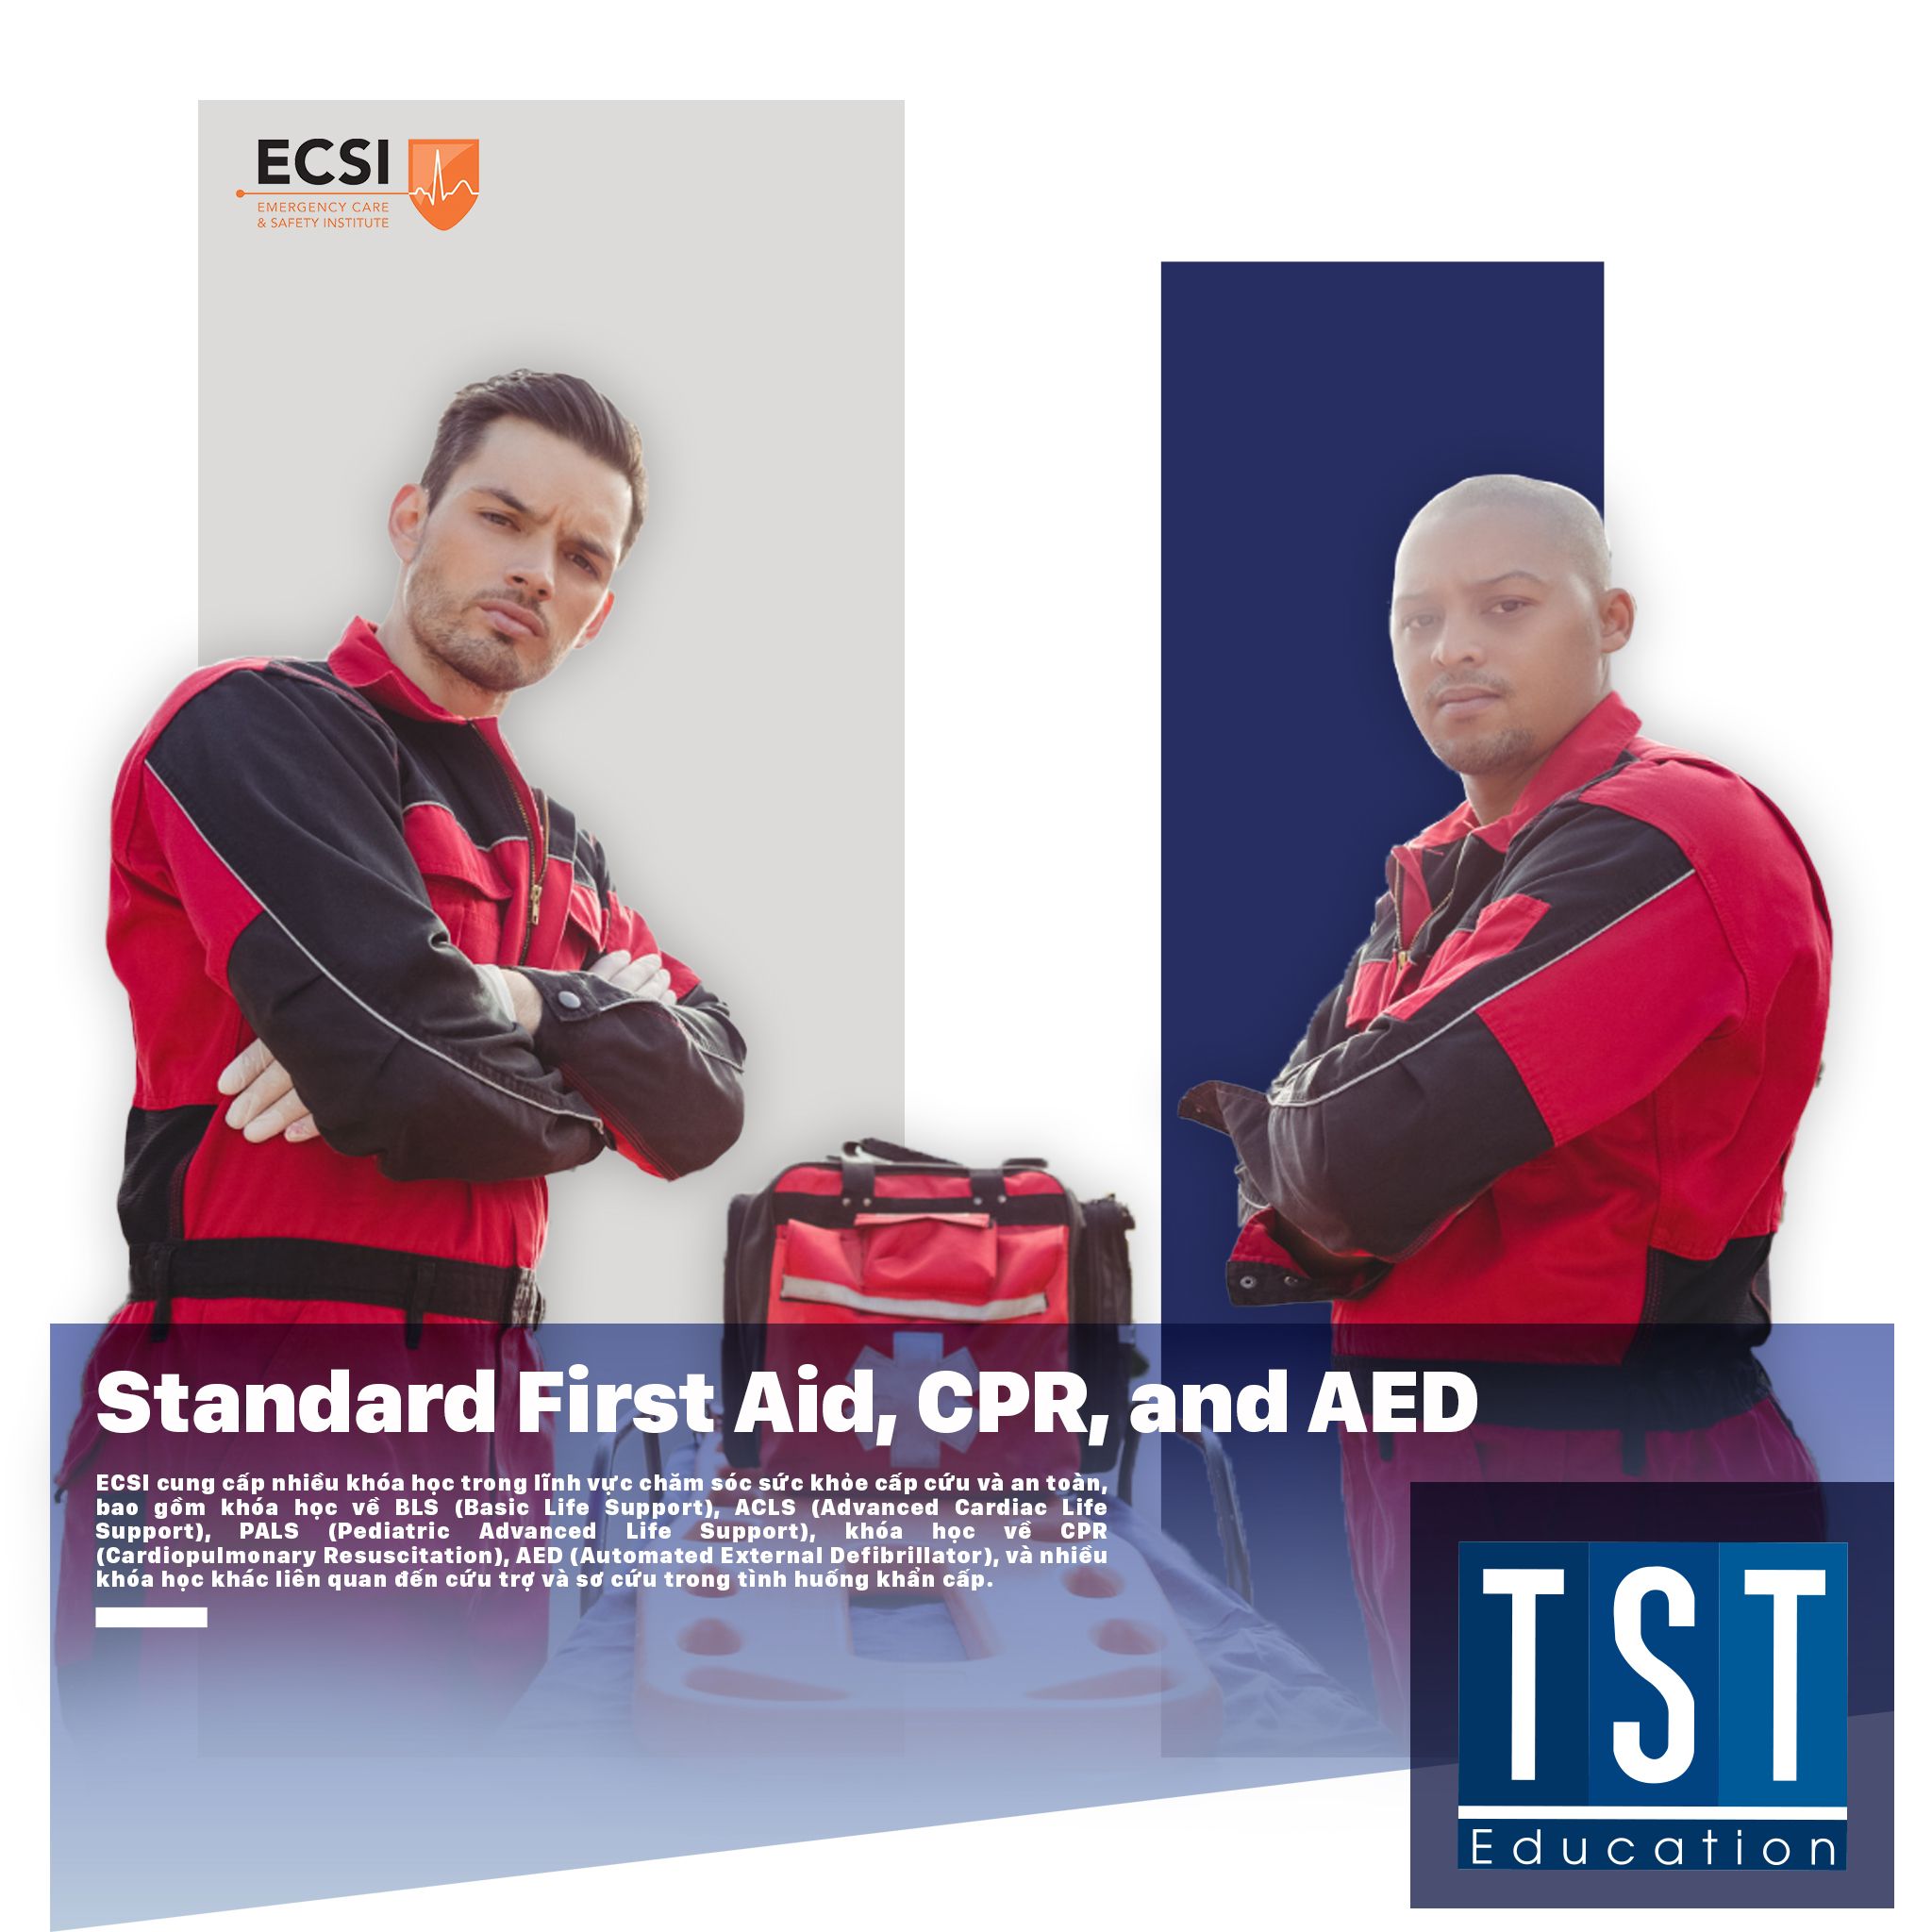  Standard First Aid, CPR, and AED(ECSI) 